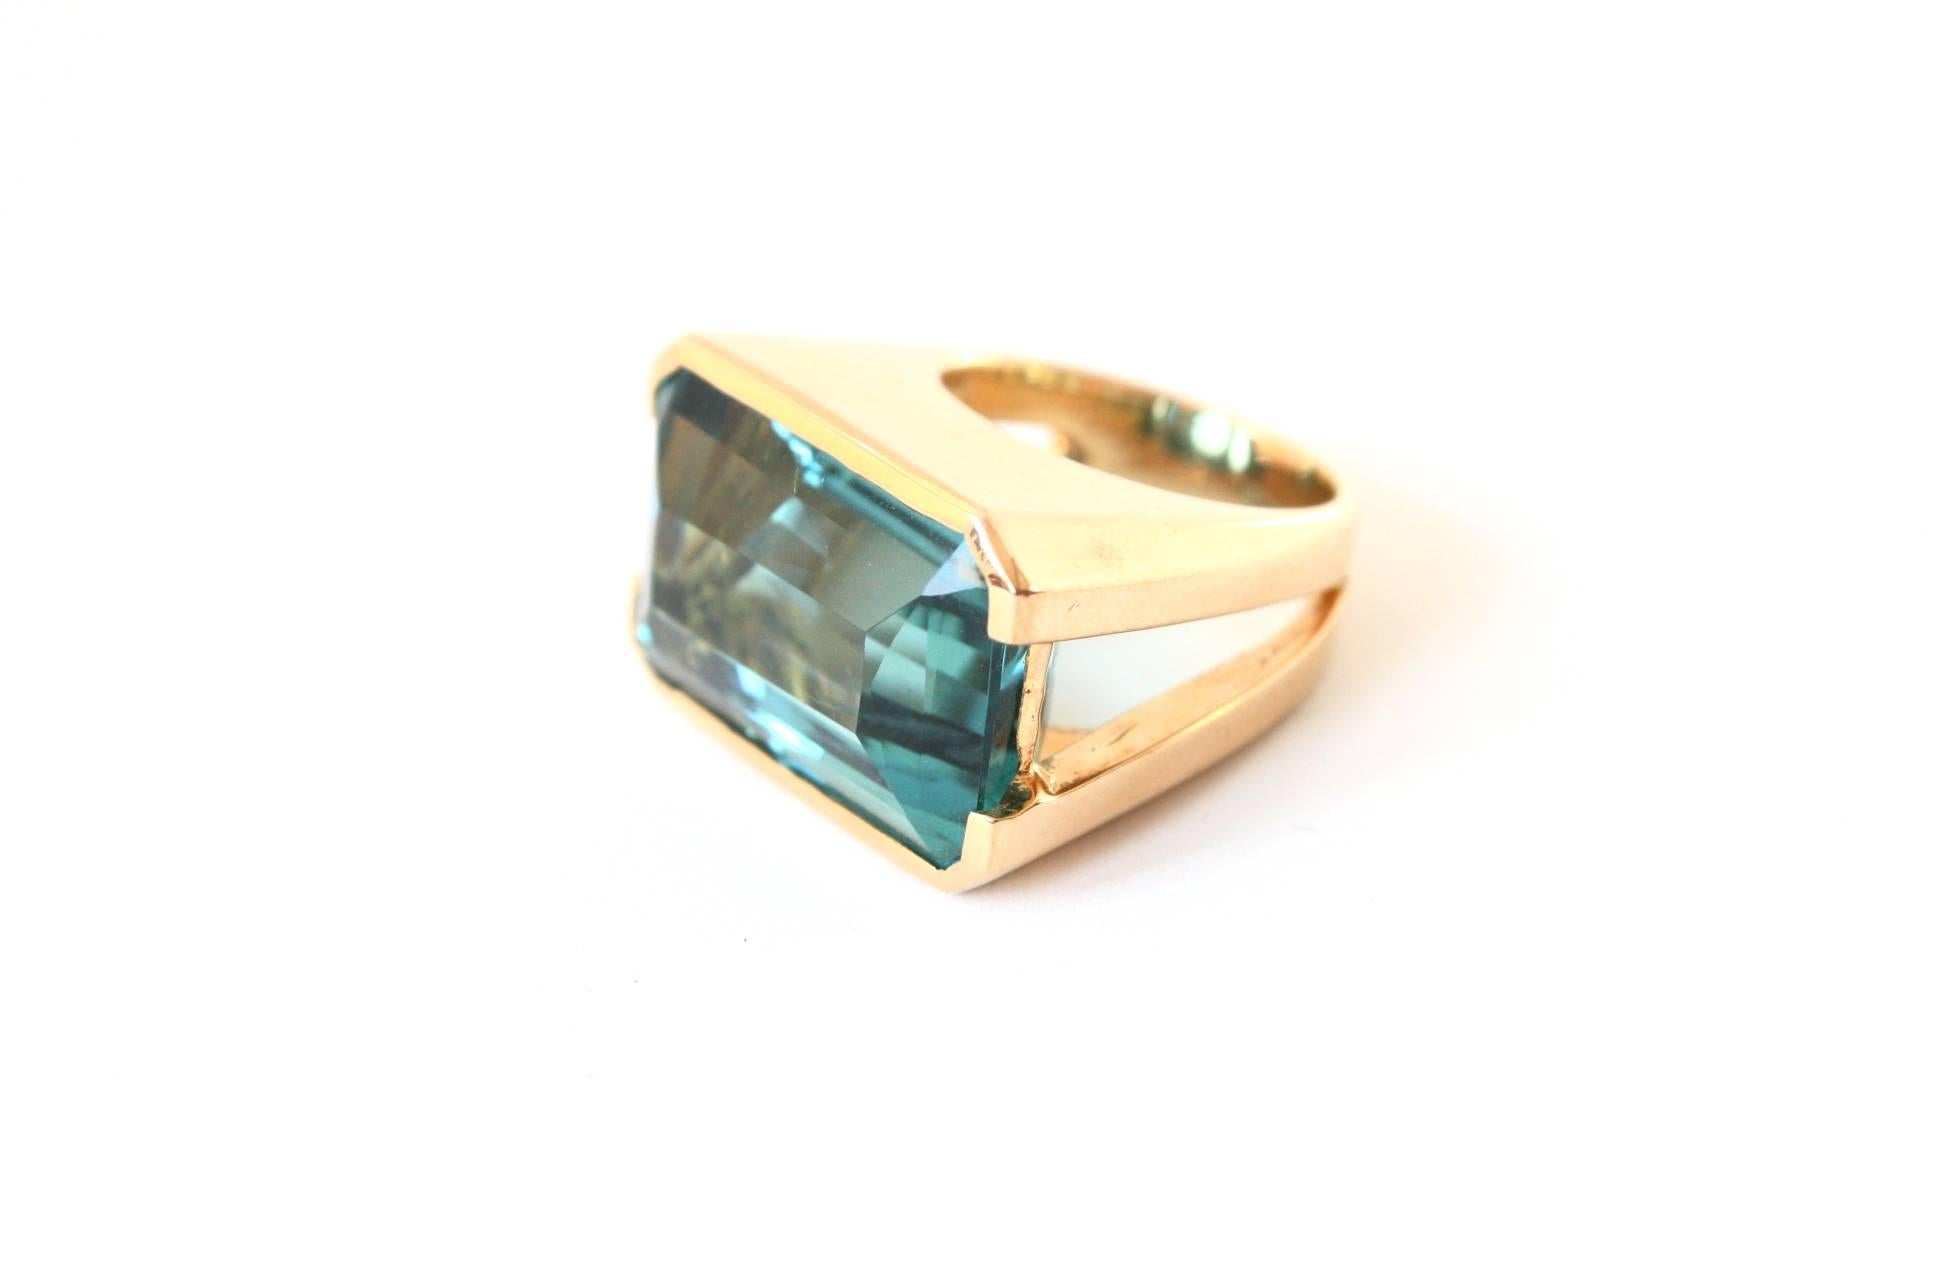 Fantastic blu topaz ring ctg 29,92  rectangular shape, gold gr.27,70.
size 12 eu. 
All Giulia Colussi jewelry is new and has never been previously owned or worn. Each item will arrive at your door beautifully gift wrapped in our boxes, put inside an